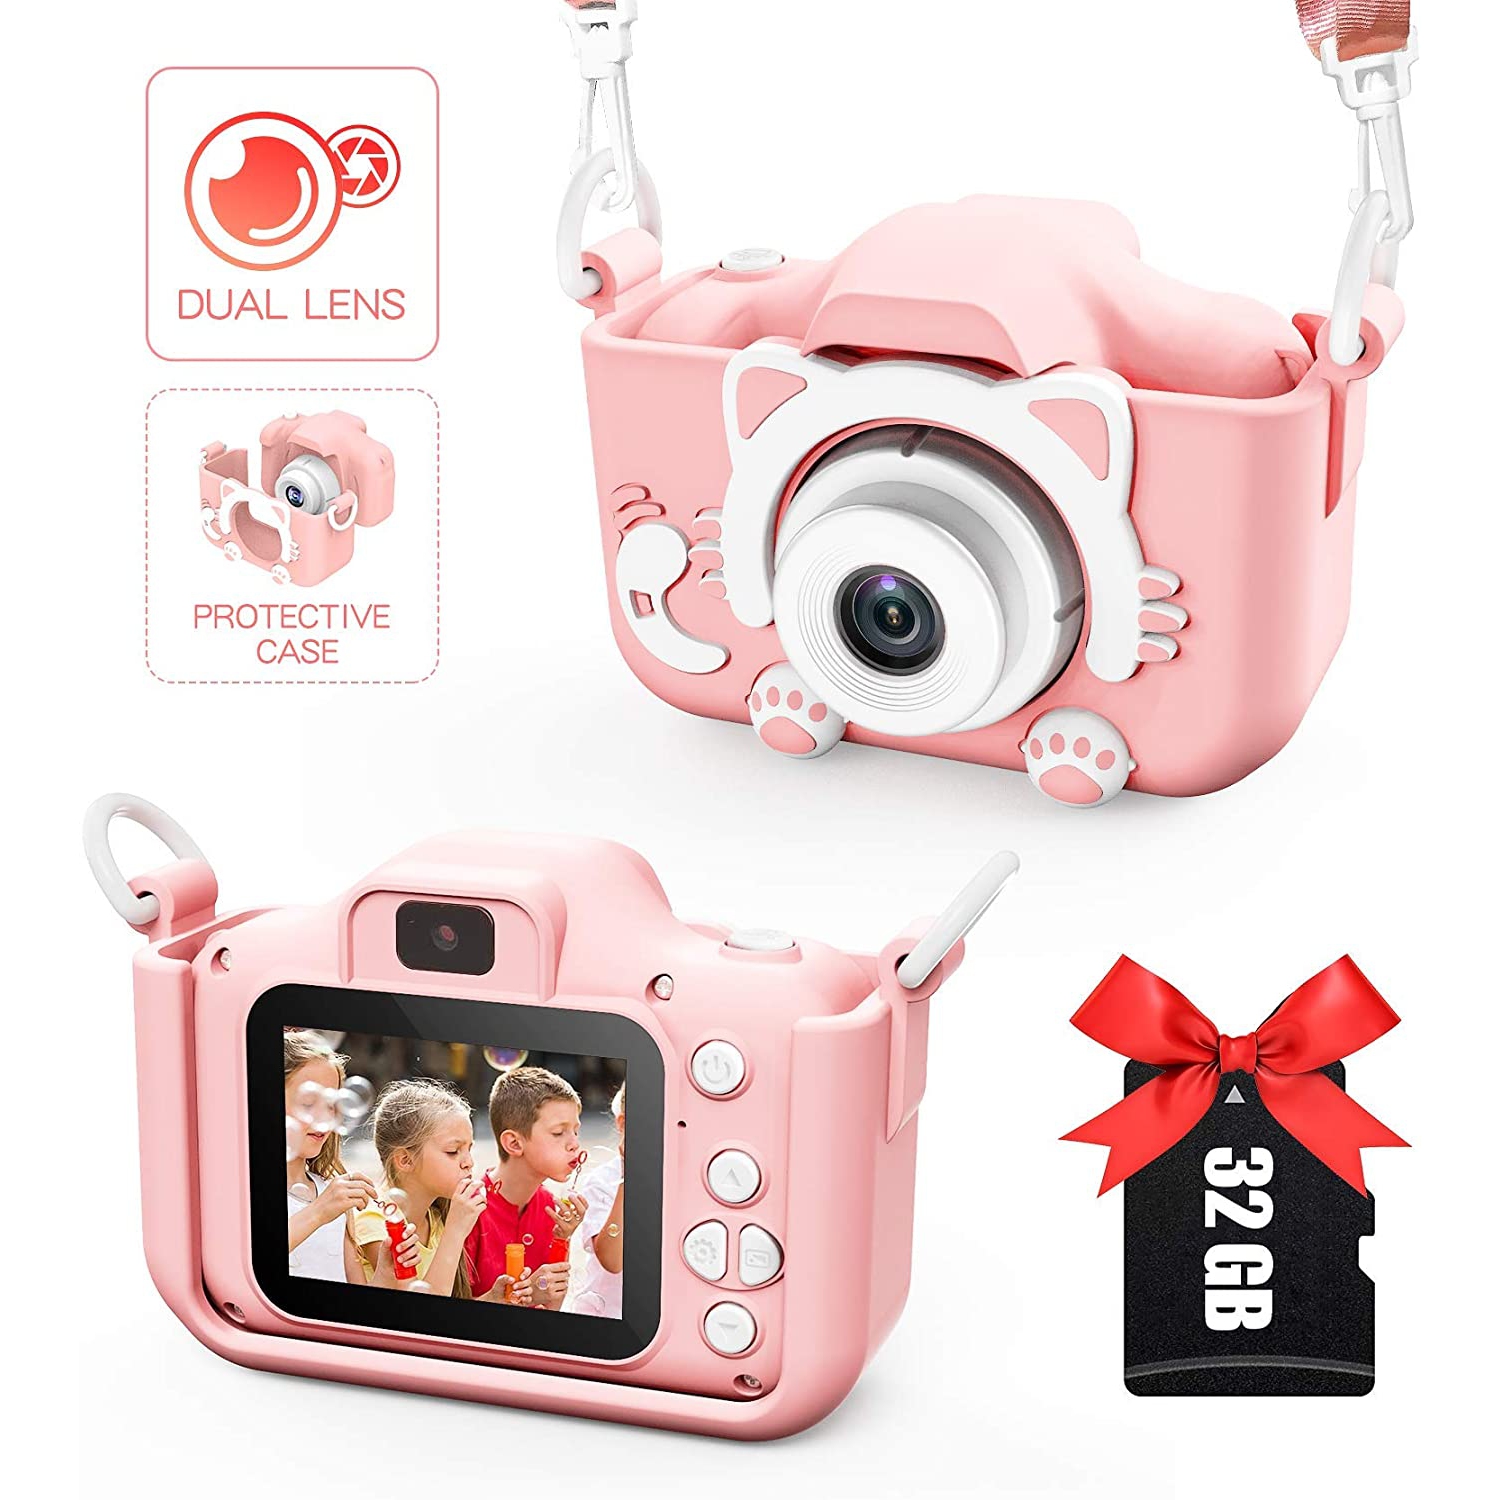 Dolaer Kids Digital Dual Camera 2.0 Inches Screen 20MP Video Camcorder Anti-Drop Children Cartoon Selfie Camera, Camera for Kids with Games, Birthday Gift, 32GB Memory Card